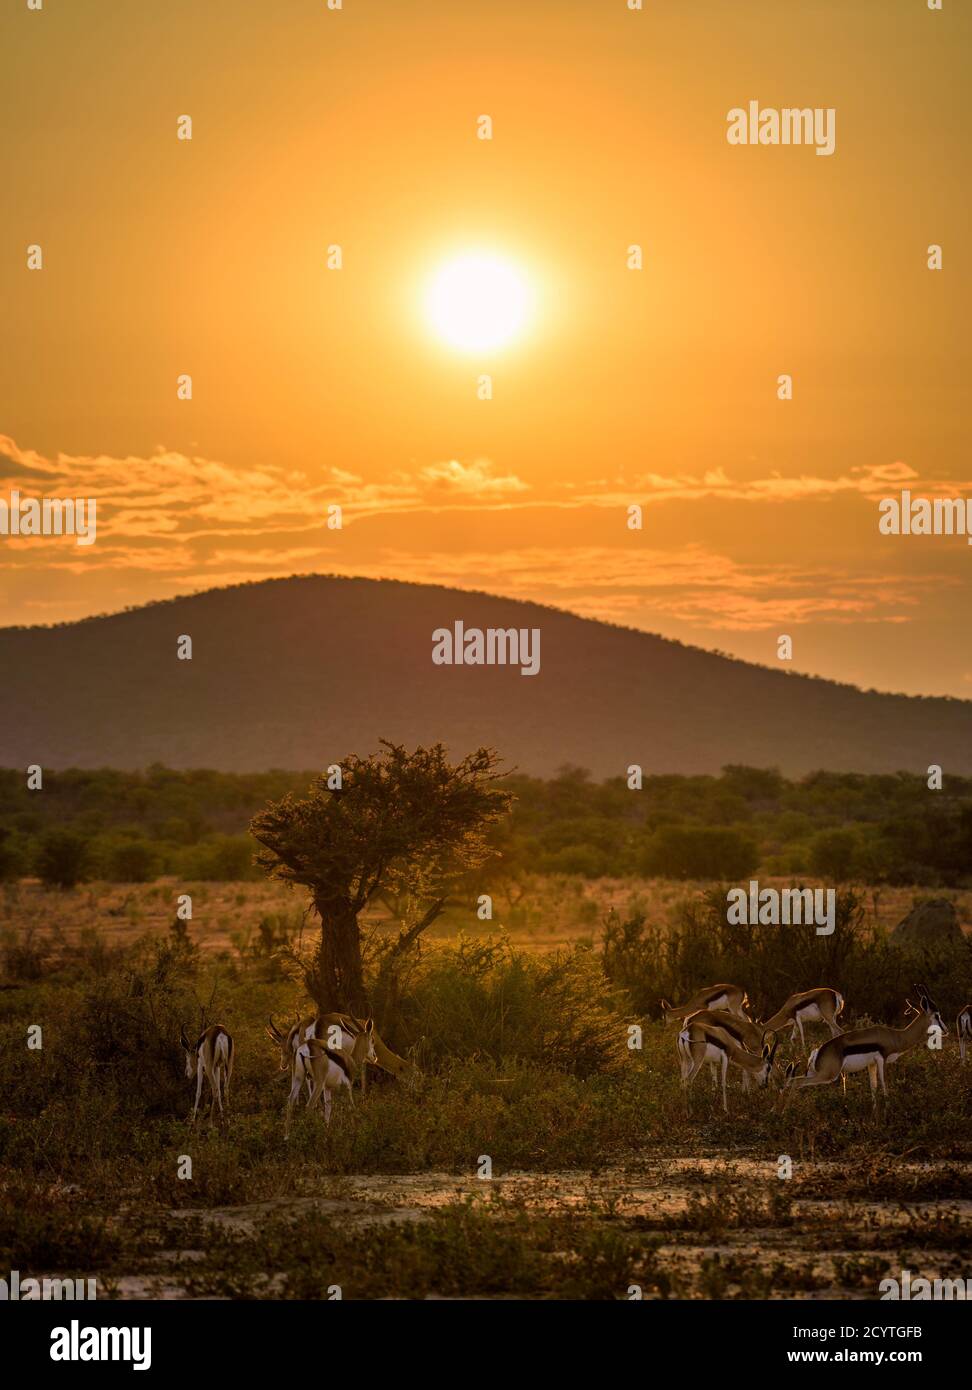 Herd of springbok antelopes photographed at sunset in Namibia Stock Photo